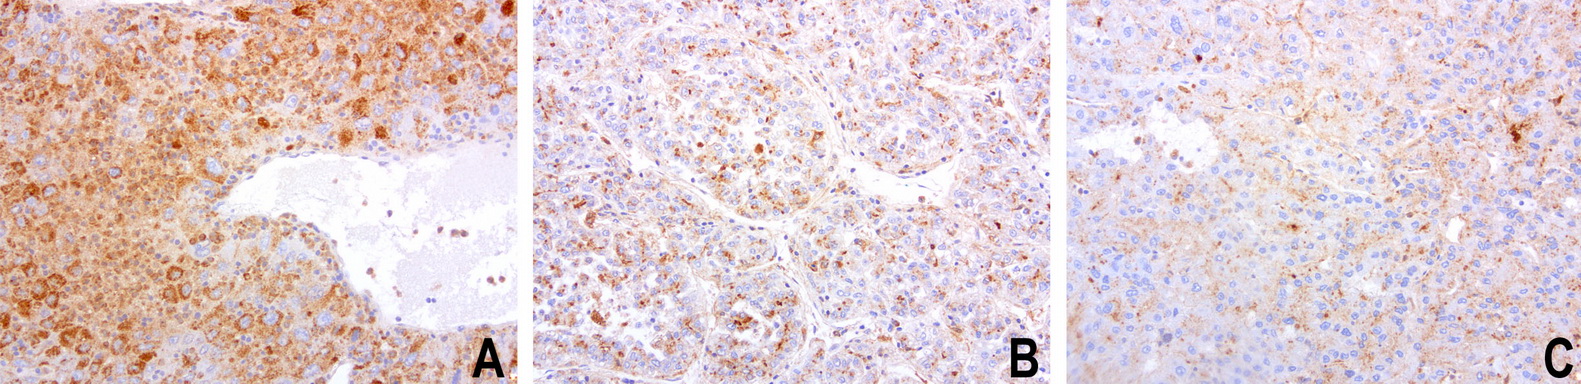 SDCBP / Syntenin Antibody - Immunohistochemical staining of paraffin-embedded composit of 3 human liver cancer cases using anti-SDCBP clone UMAB69 mouse monoclonal antibody  at 1:100 with Polink2 Broad HRP DAB detection kit; heat-induced epitope retrieval with GBI Citrate pH6.0 HIER buffer using pressure chamber for 3 minutes at 110C. Membrane and cytoplasmic staining is seen in tumor cells with various intensity.